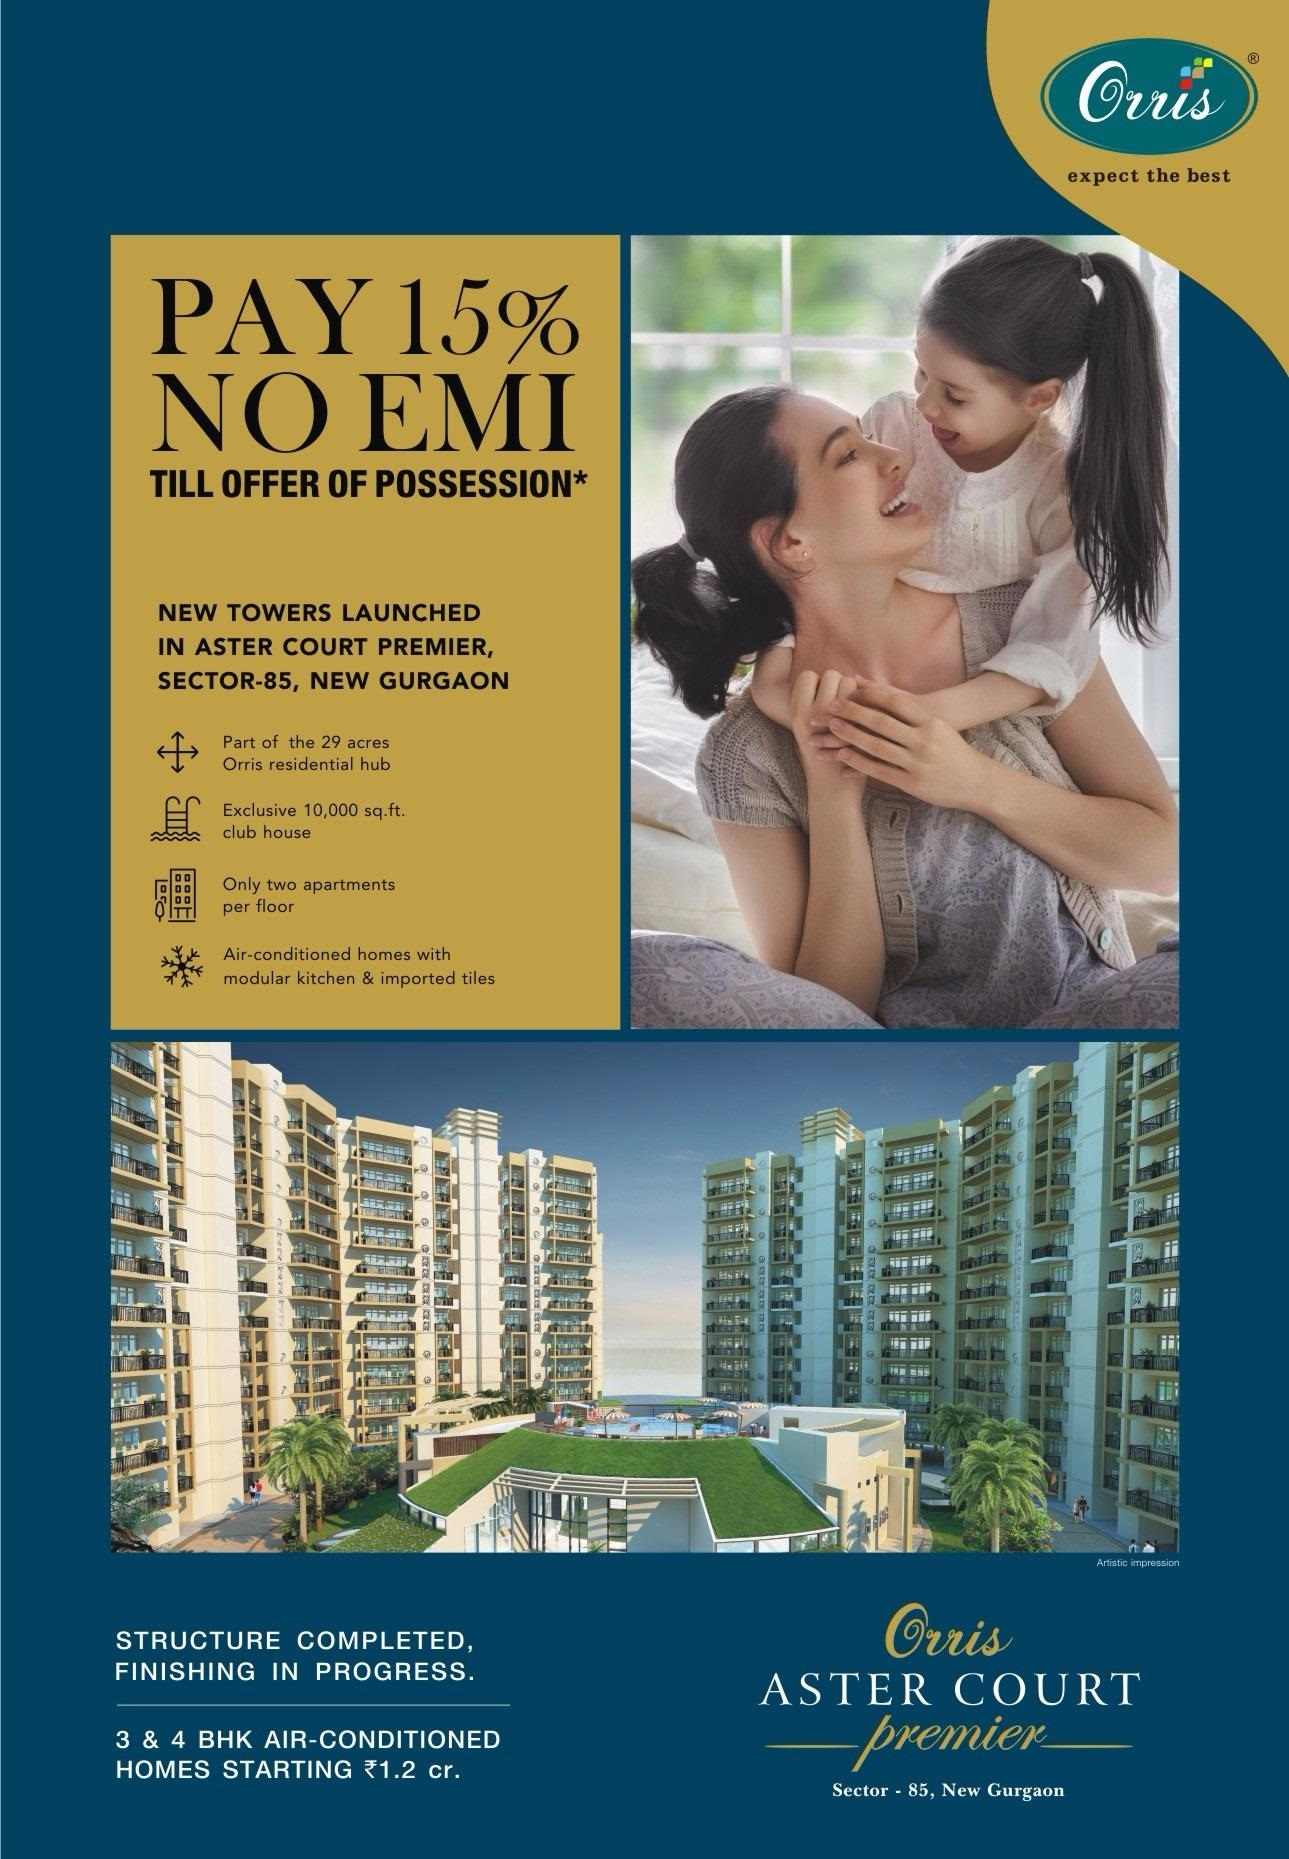 Buy 3 & 4 BHK air conditioned homes starting @ 1.2 cr. by paying 15% with no EMI till possession at Orris Aster Court Premier